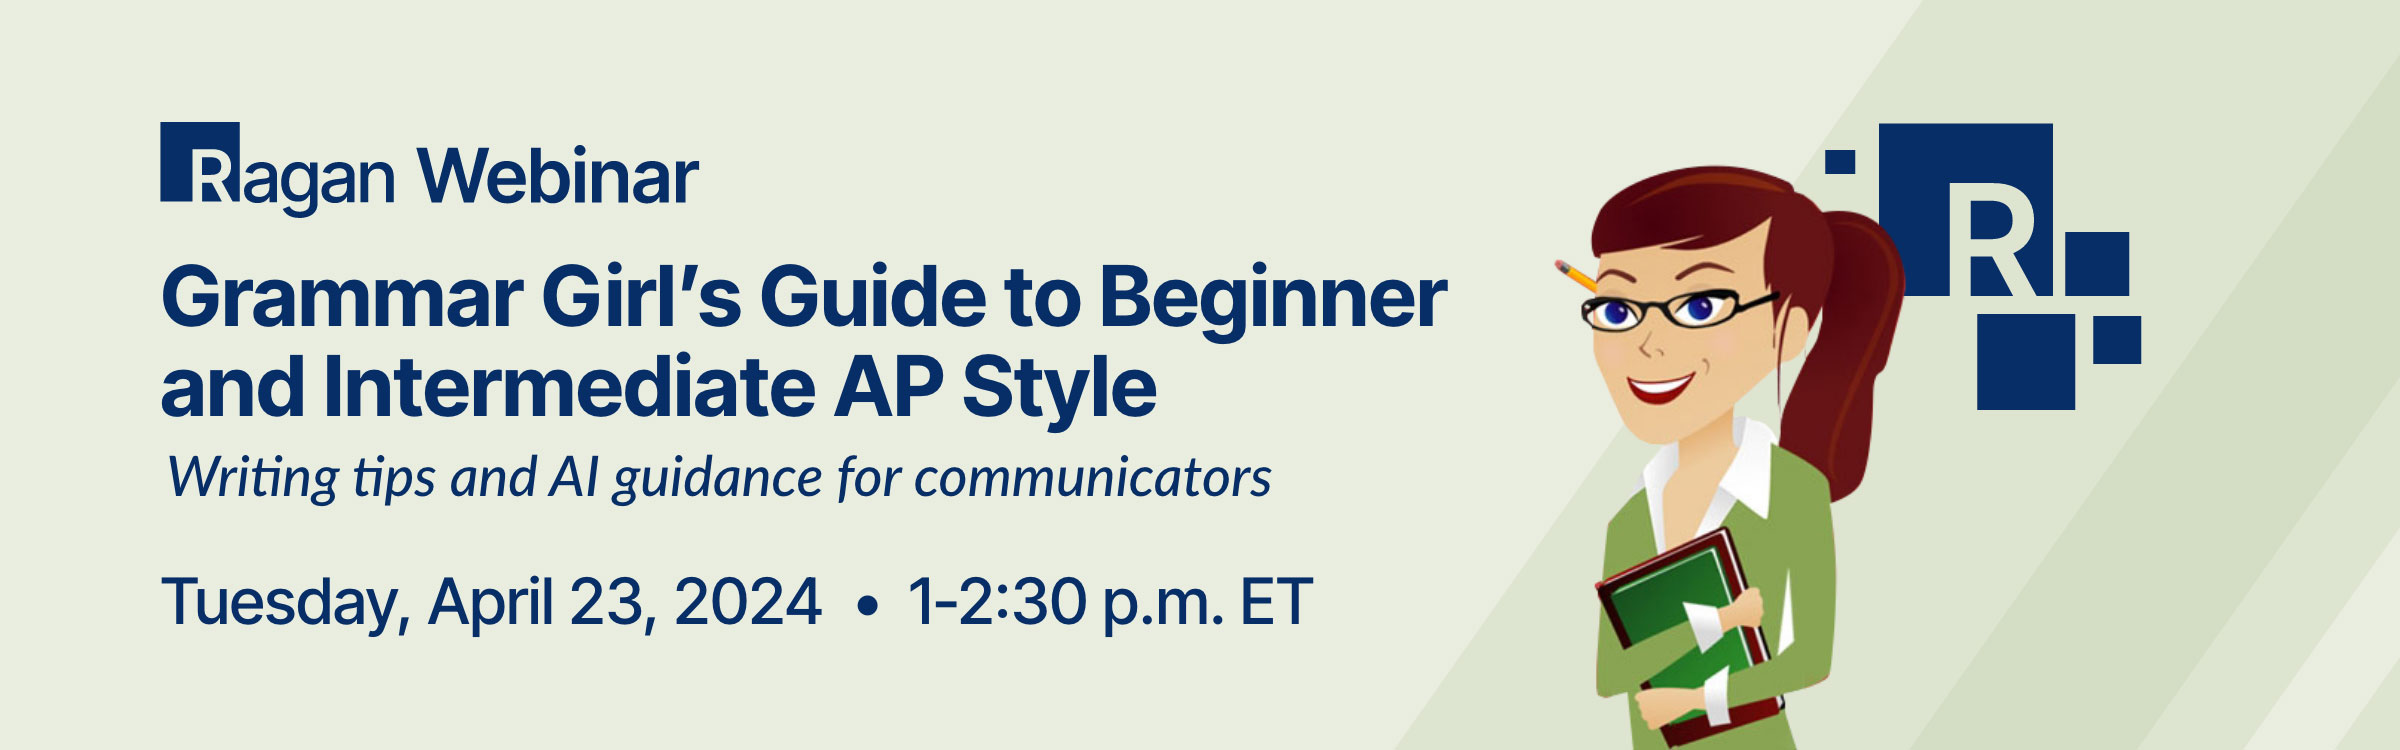 Presentation Handouts For: Y24TCGA042324-  Grammar Girl’s Guide to Beginner and Intermediate AP Style